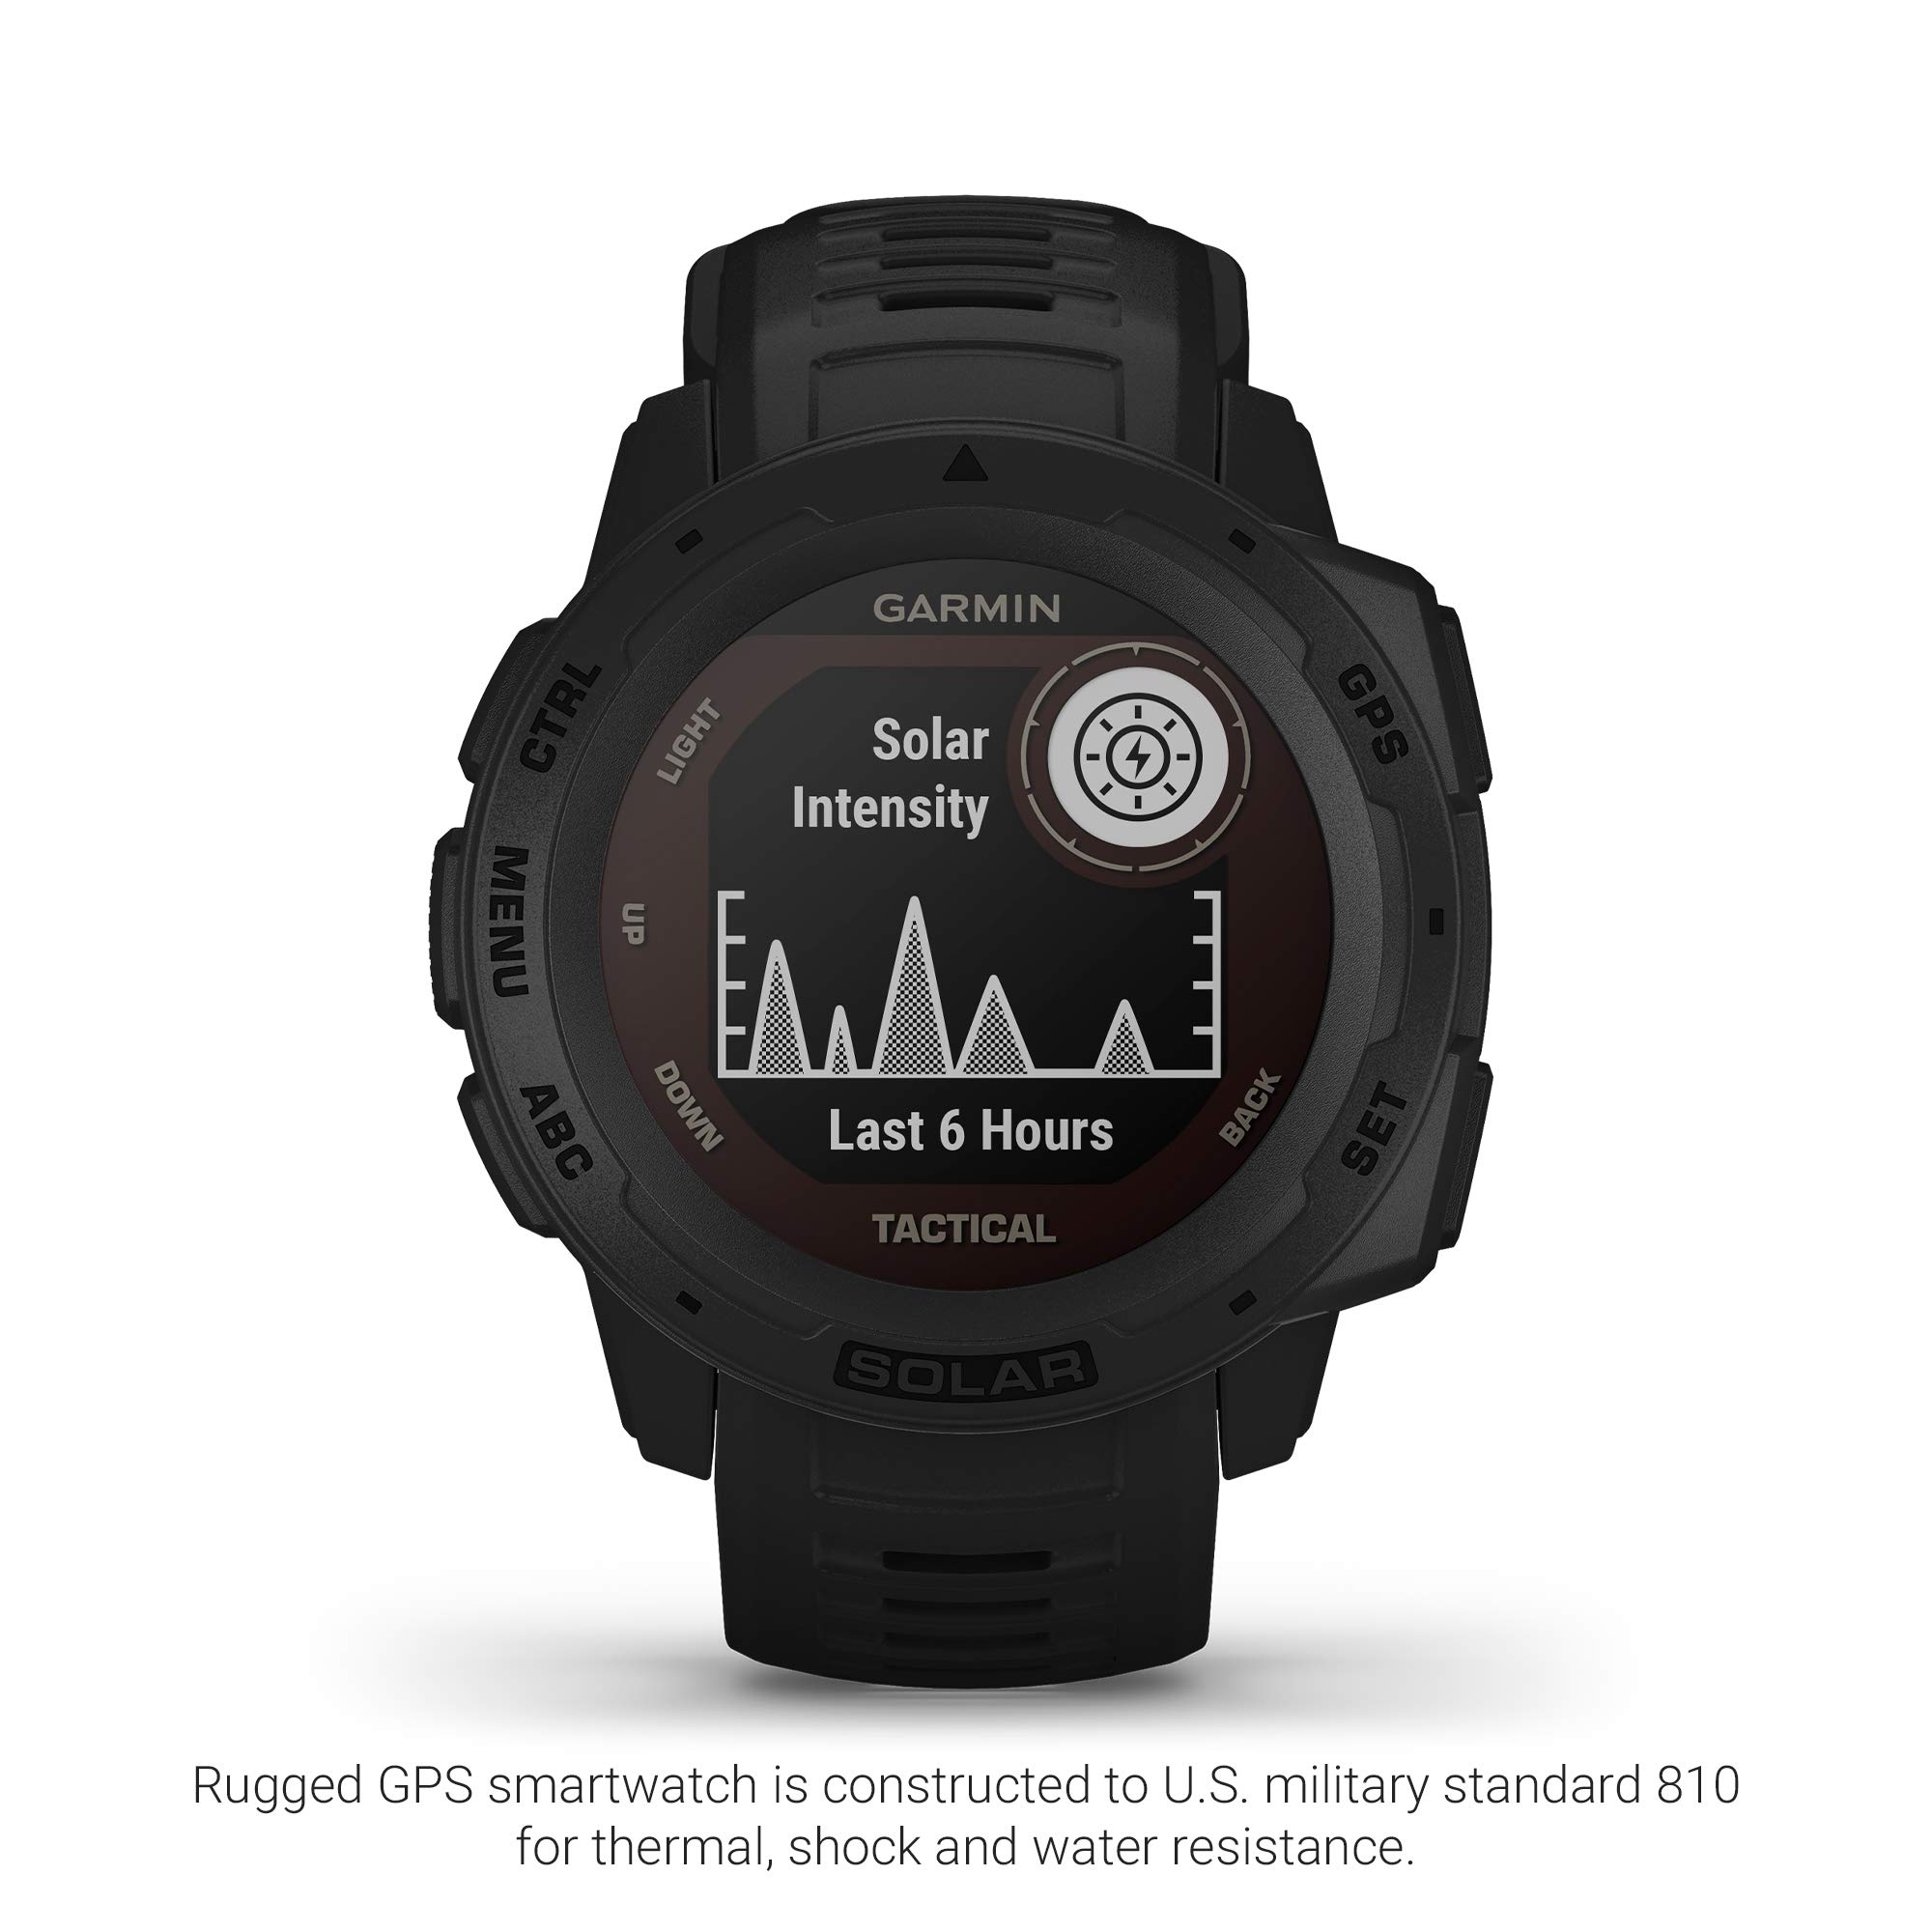 Garmin Instinct Solar , Rugged Outdoor Smartwatch with Solar Charging Capabilities and Tactical Features, Built-in Sports Apps and Health Monitoring, Black